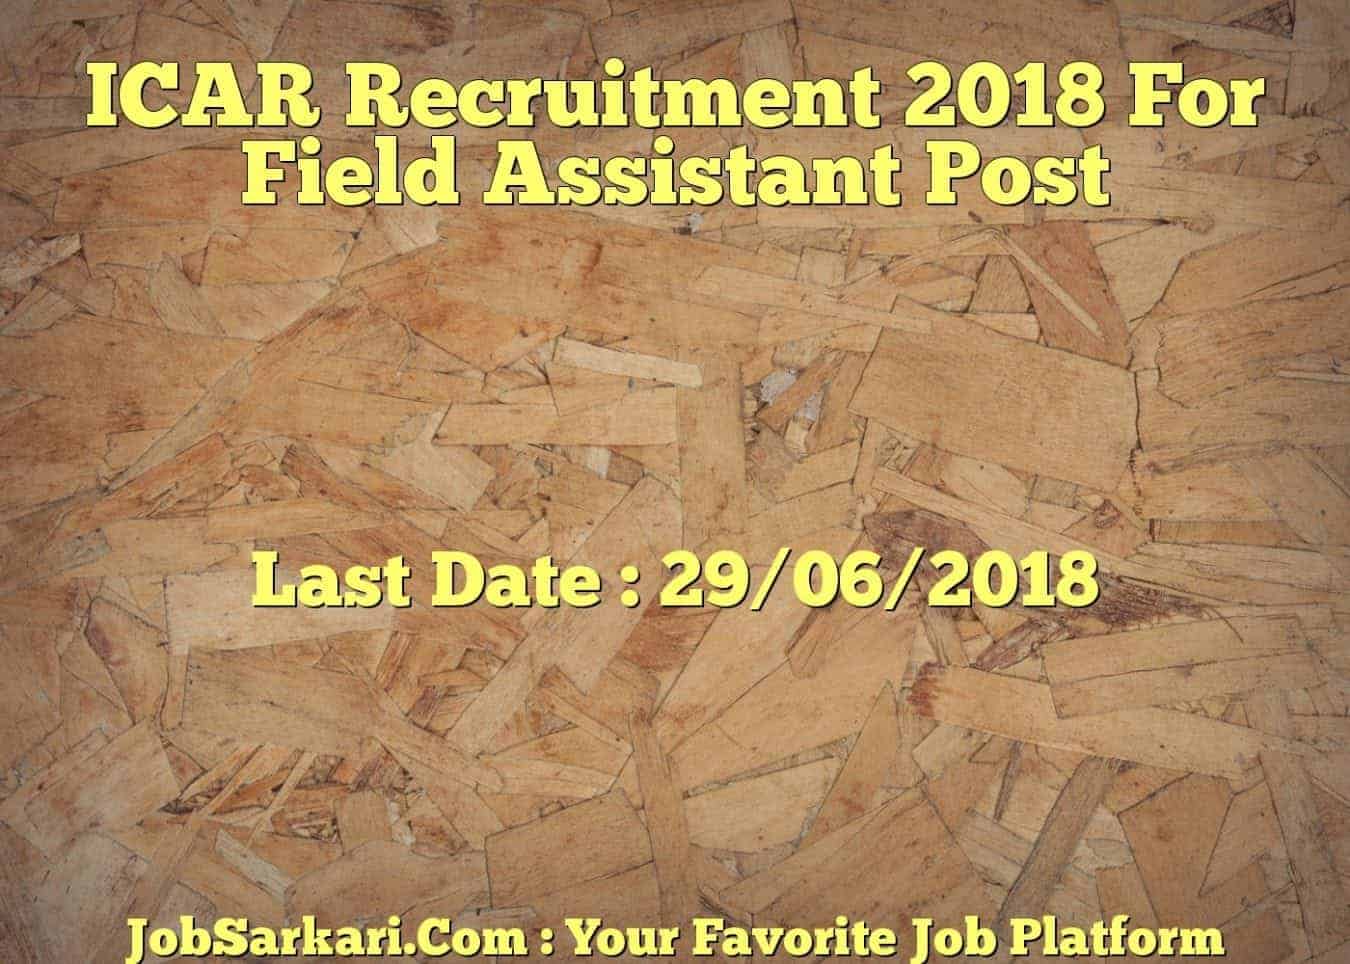 ICAR Recruitment 2018 For Field Assistant Post